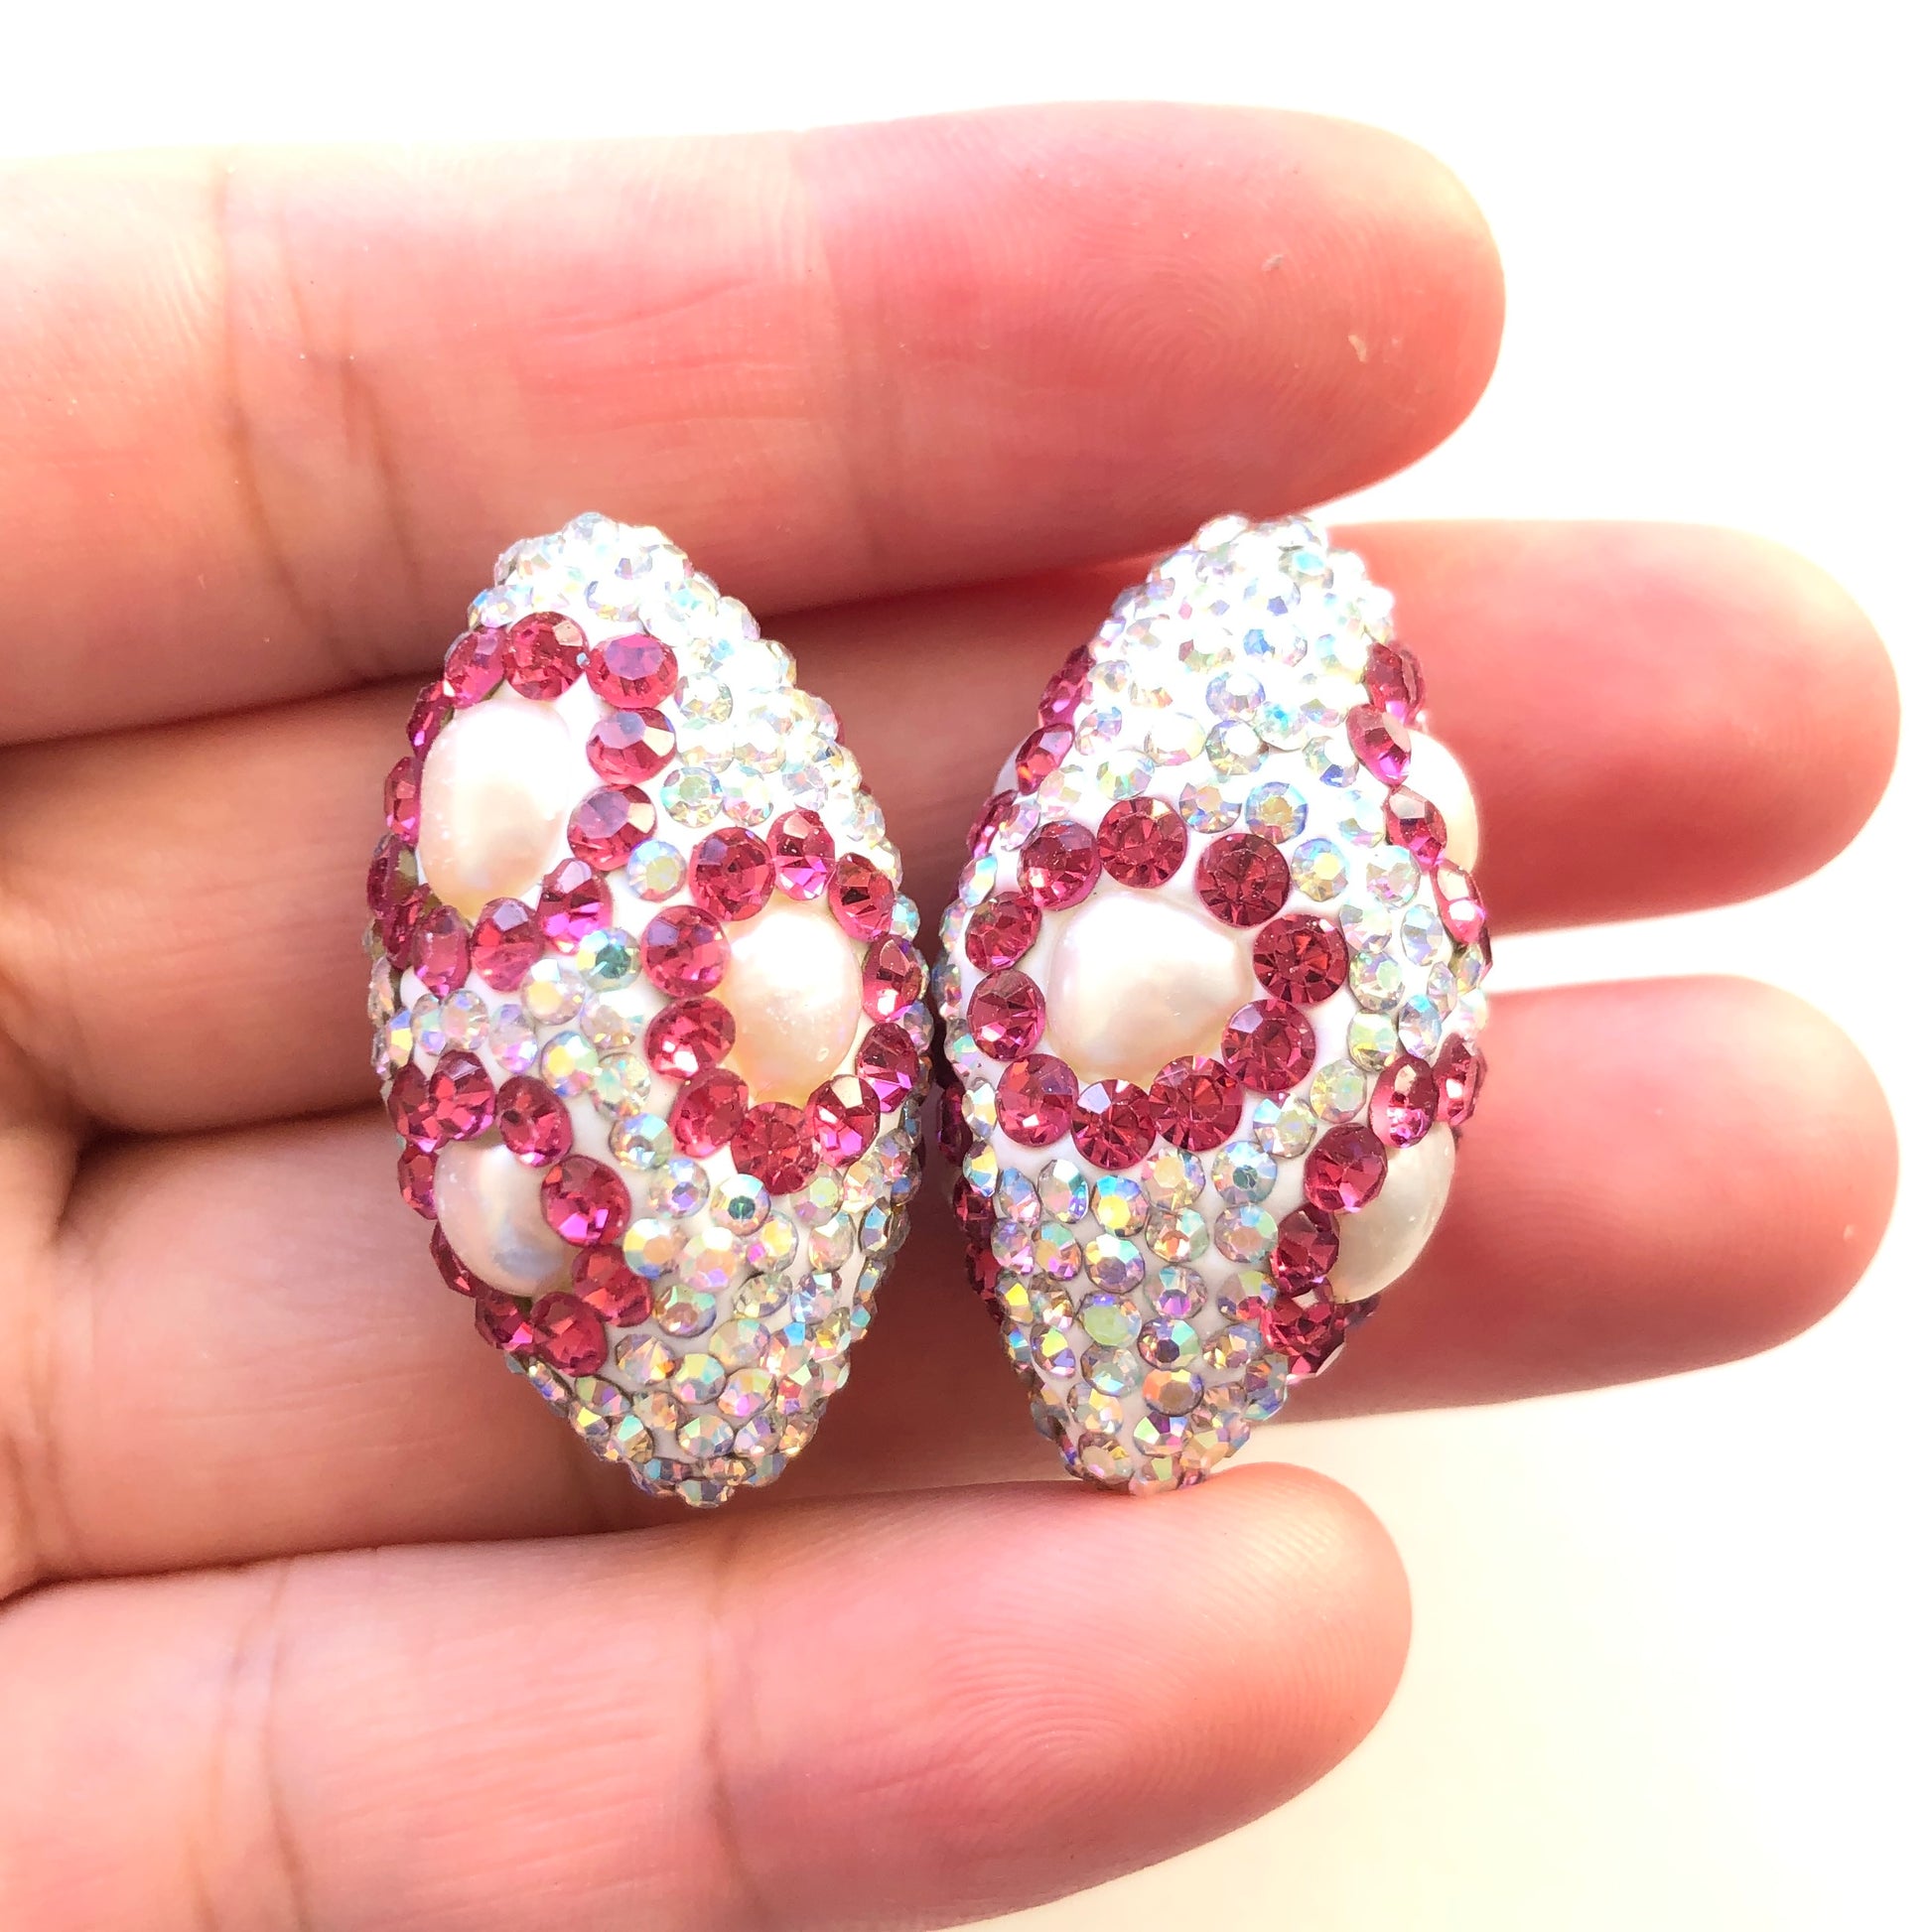 1PC Multicolor Rhinestone Pave Oval Spacers / Focal Beads Style 3 Rhinestone Spacers Focal Beads Charms Beads Beyond